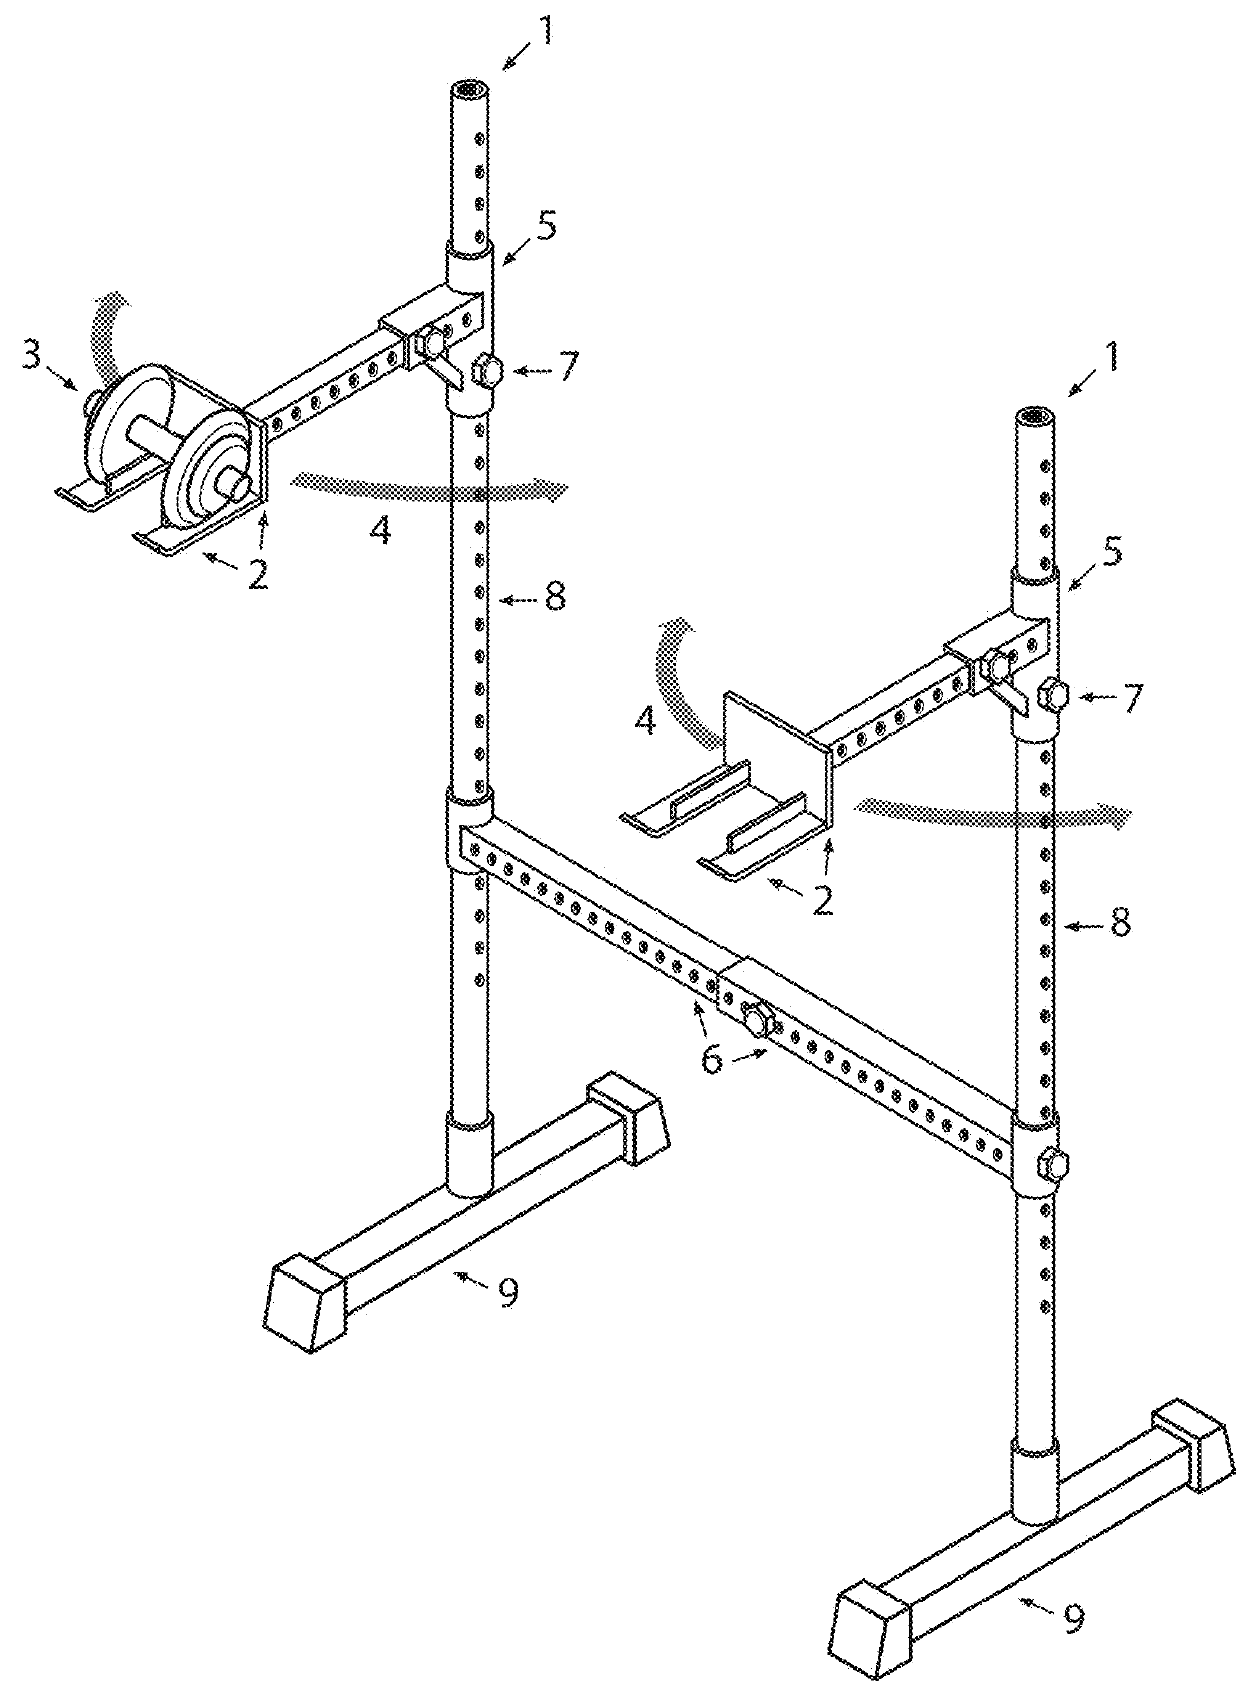 Device to Position Dumbbells for Exercise